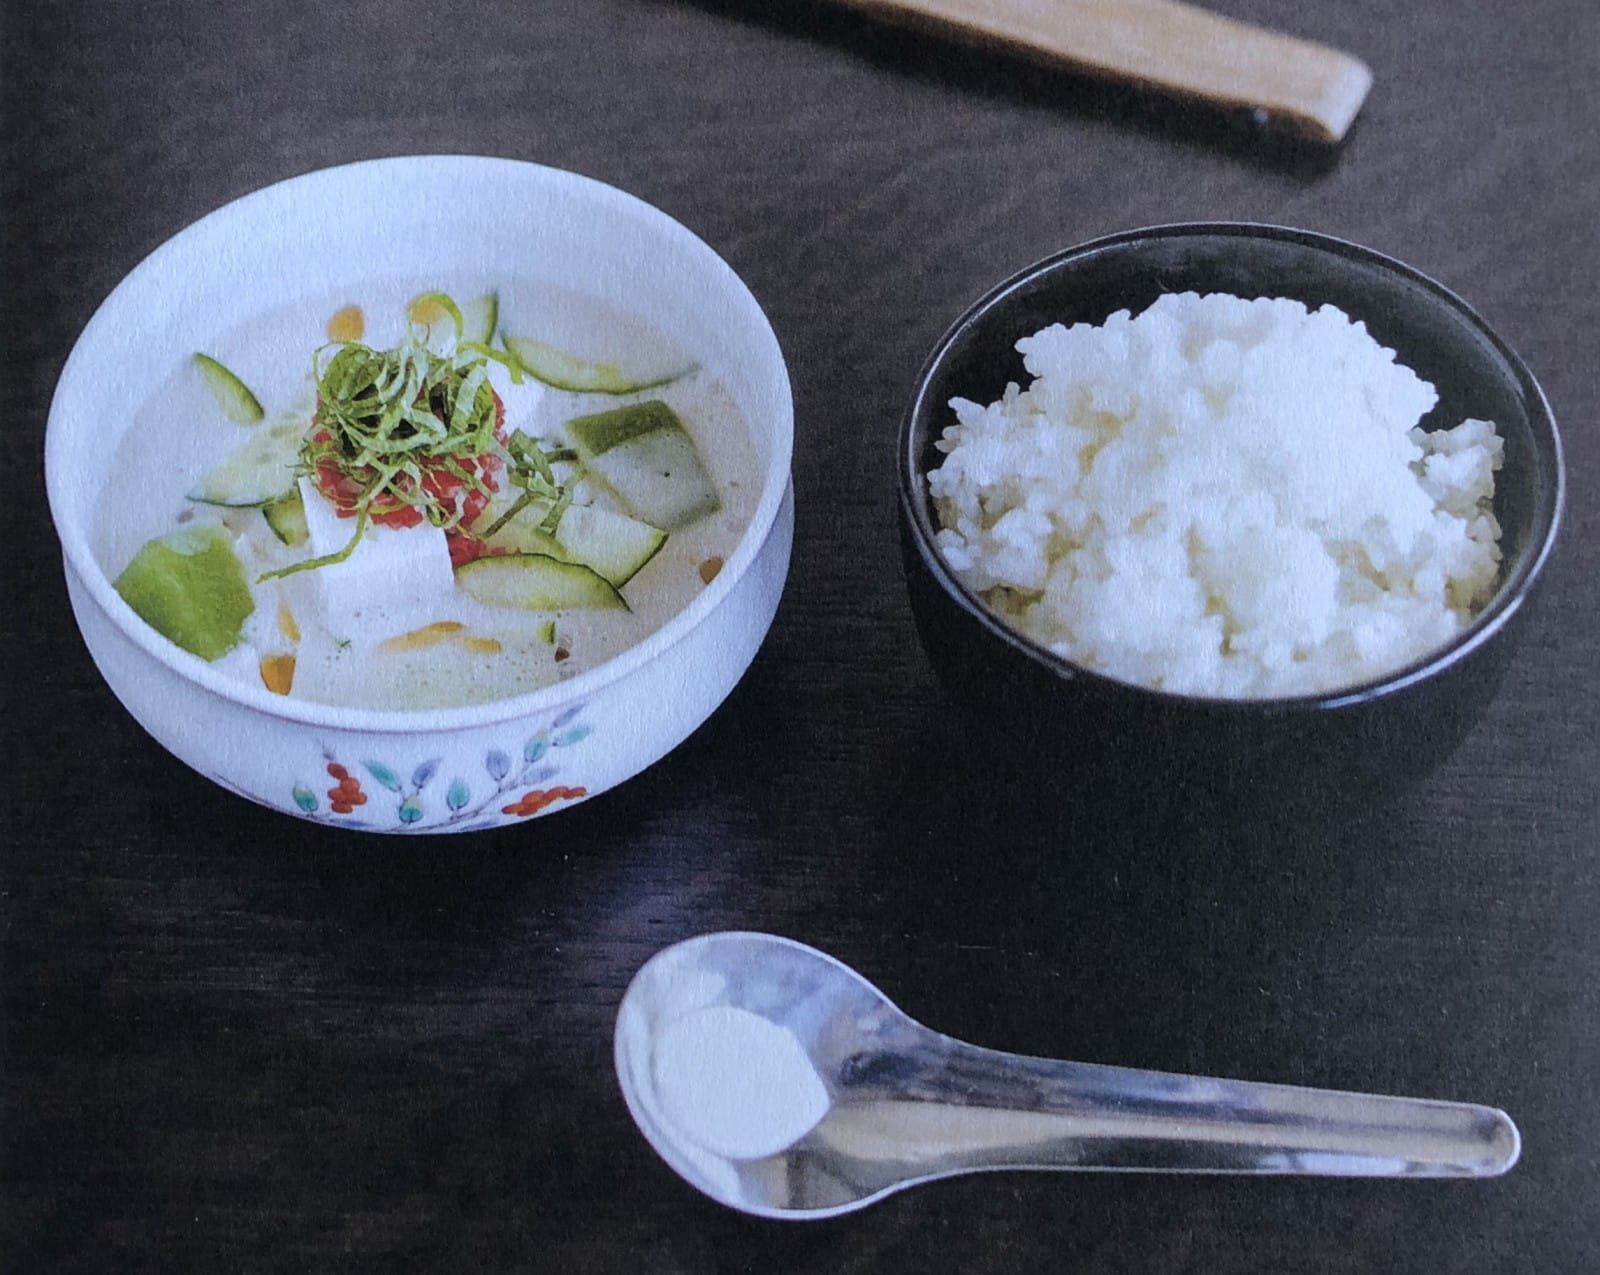 Hiyajiru (chilled miso soup) with cucumber ice cubes